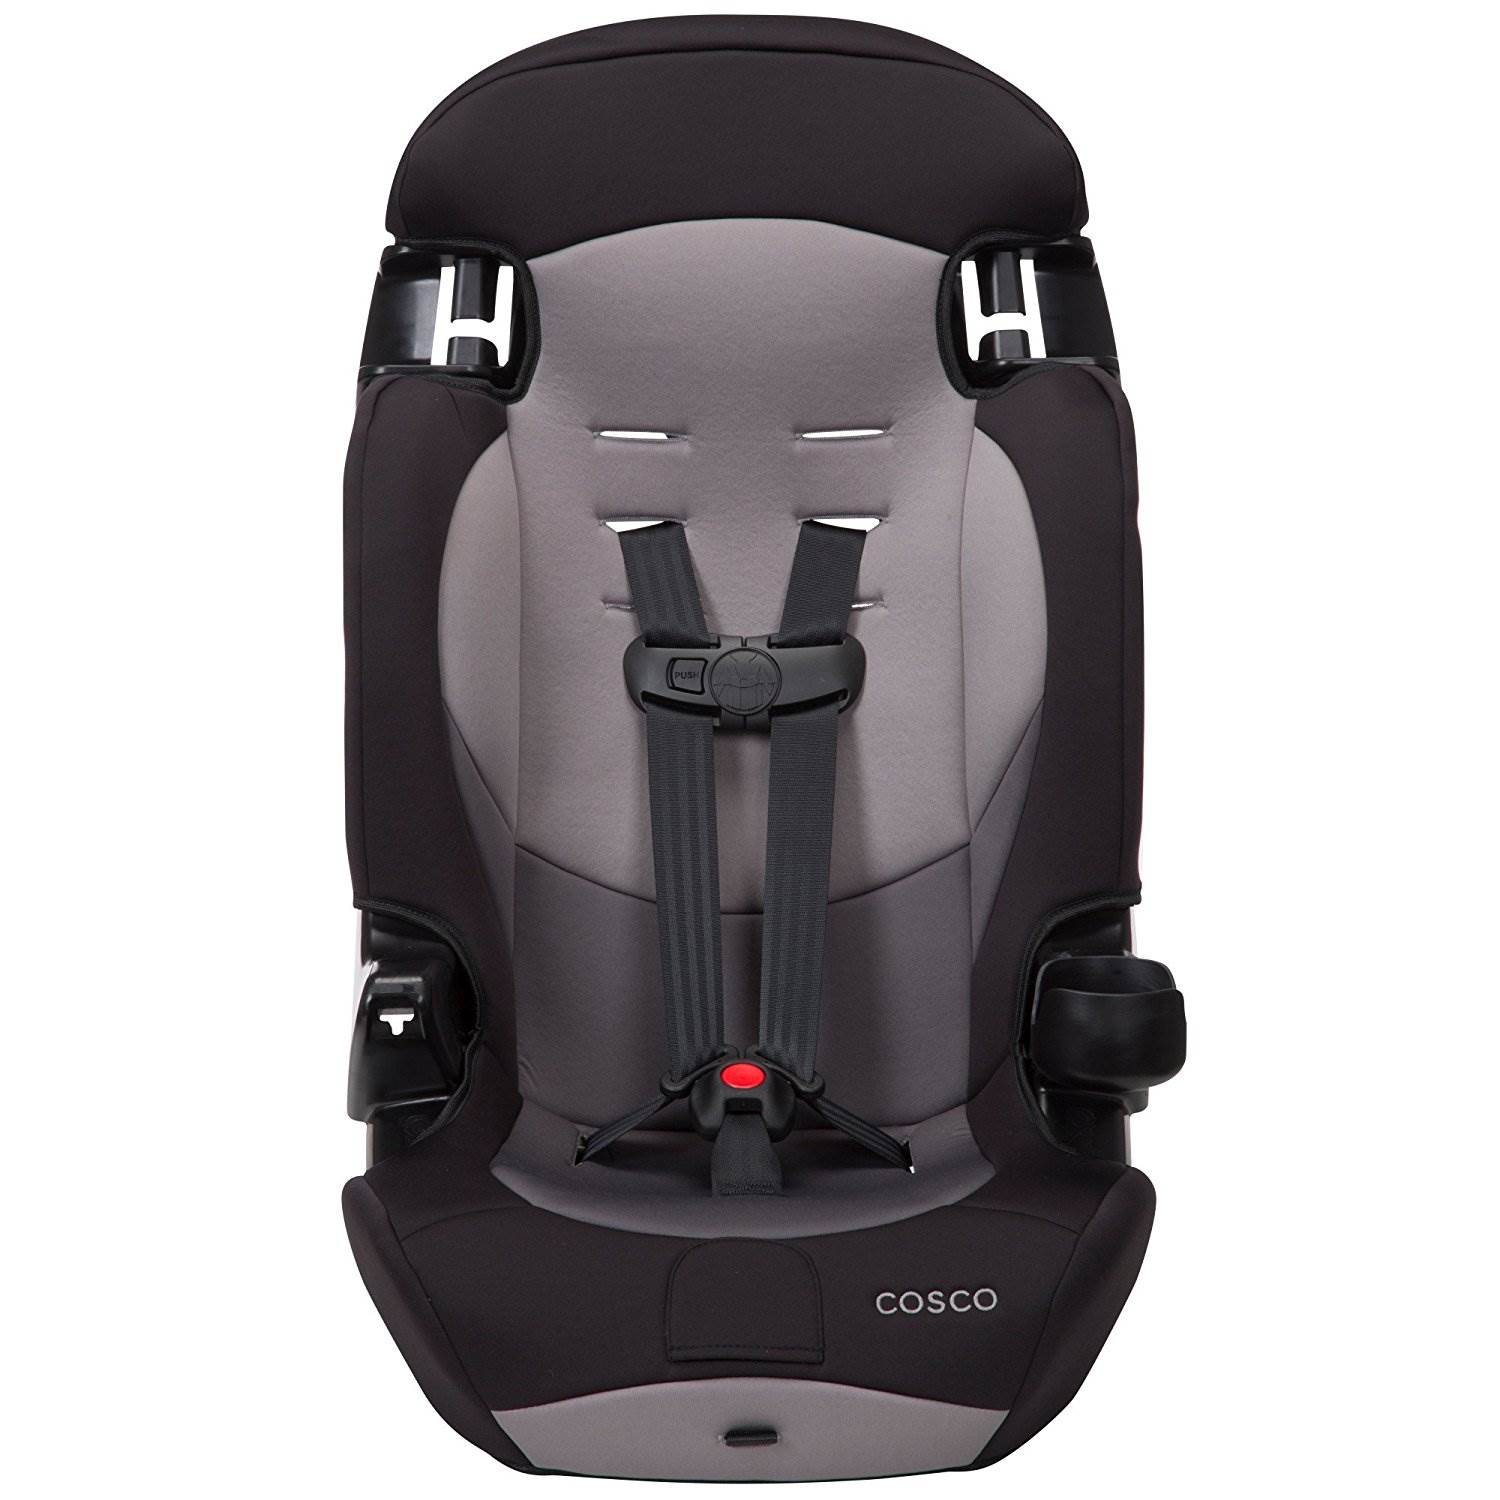 Cosco Finale DX 2-in-1 Booster Car Seat, Dusk - image 5 of 7